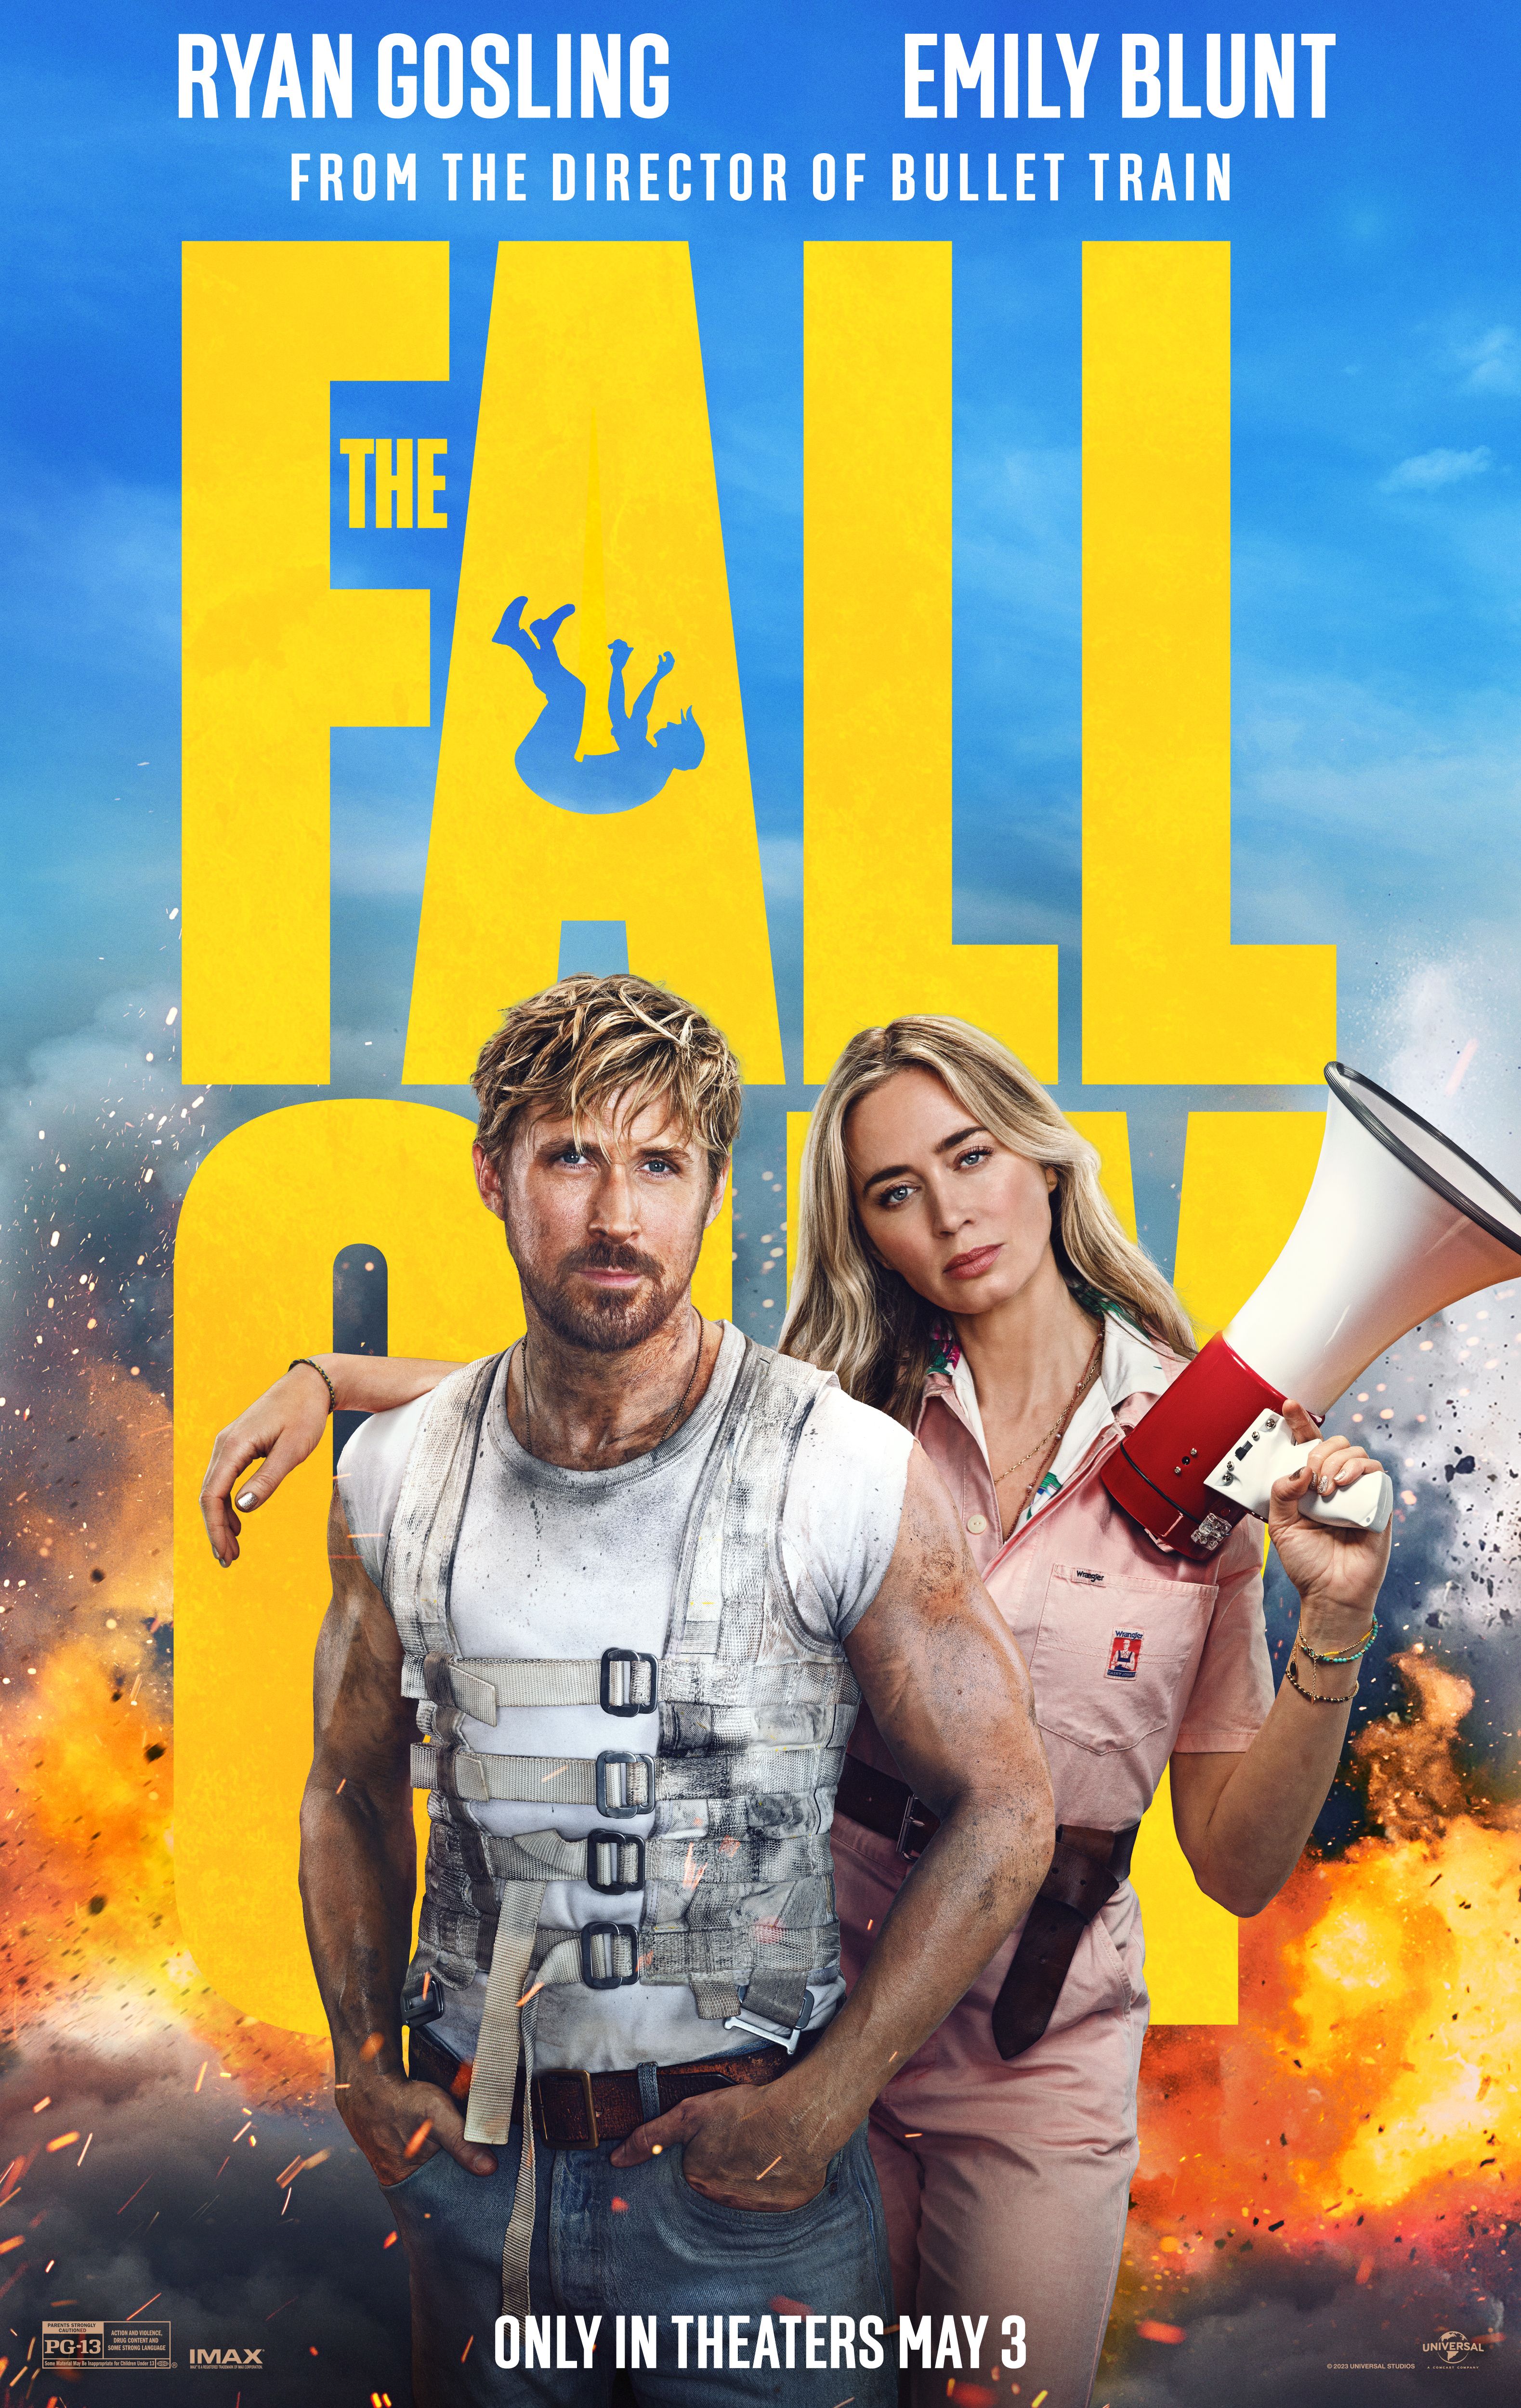 The Fall Guy Movie Poster Featuring Emily Blunt Holding a Megaphone Standing Next to Ryan Gosling in Front of an Explosion